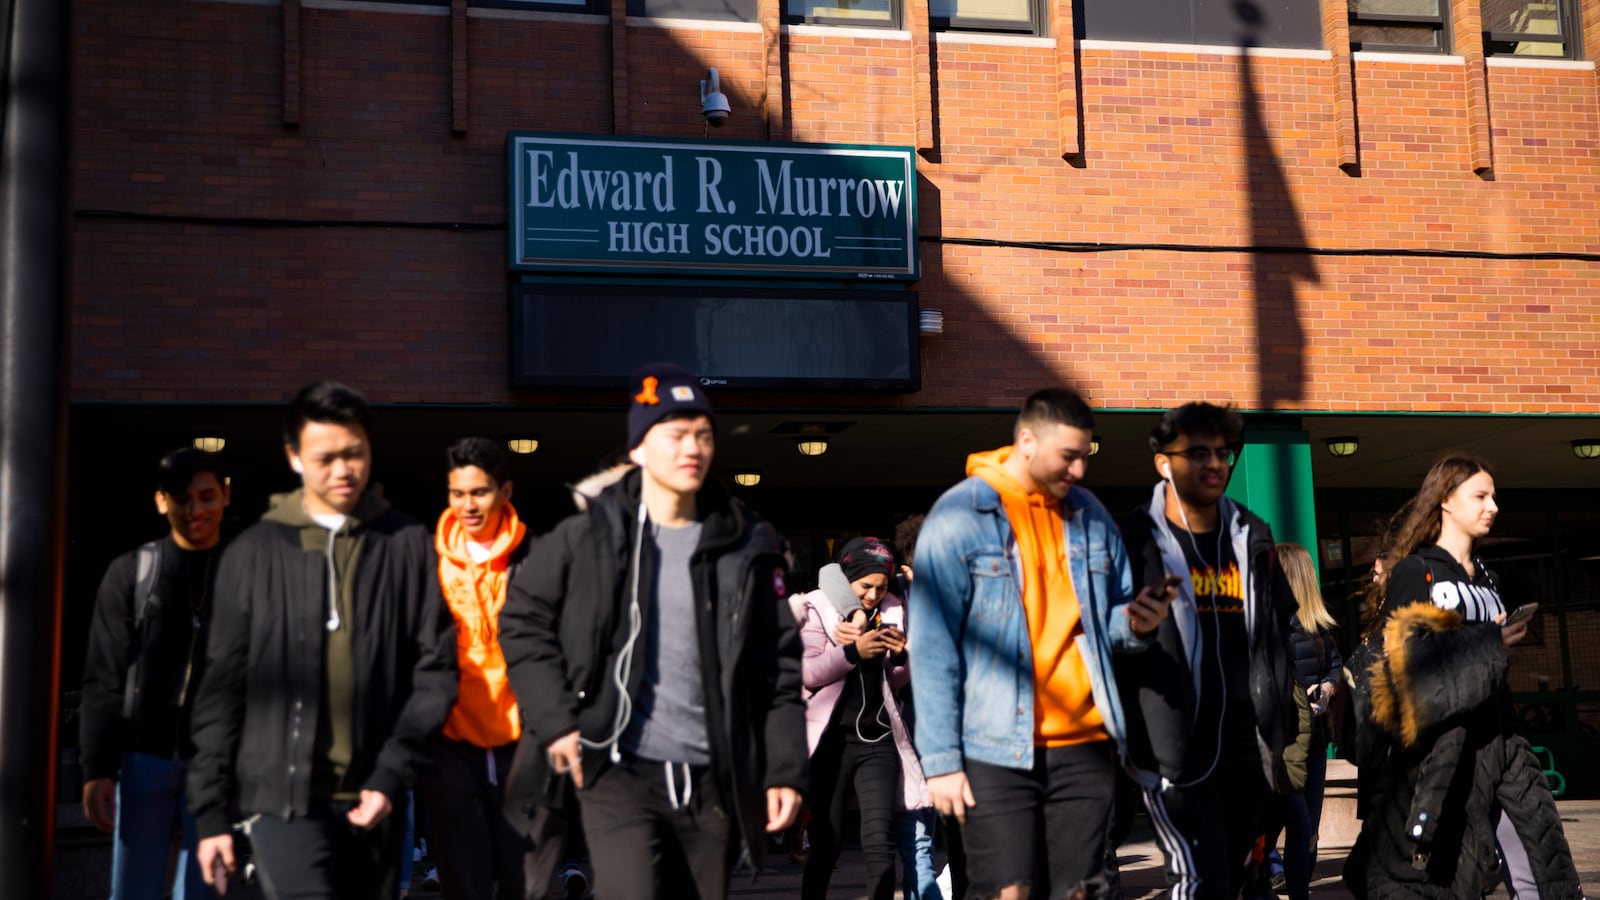 Students file out of a brick building labeled Edward R. Murrow High School